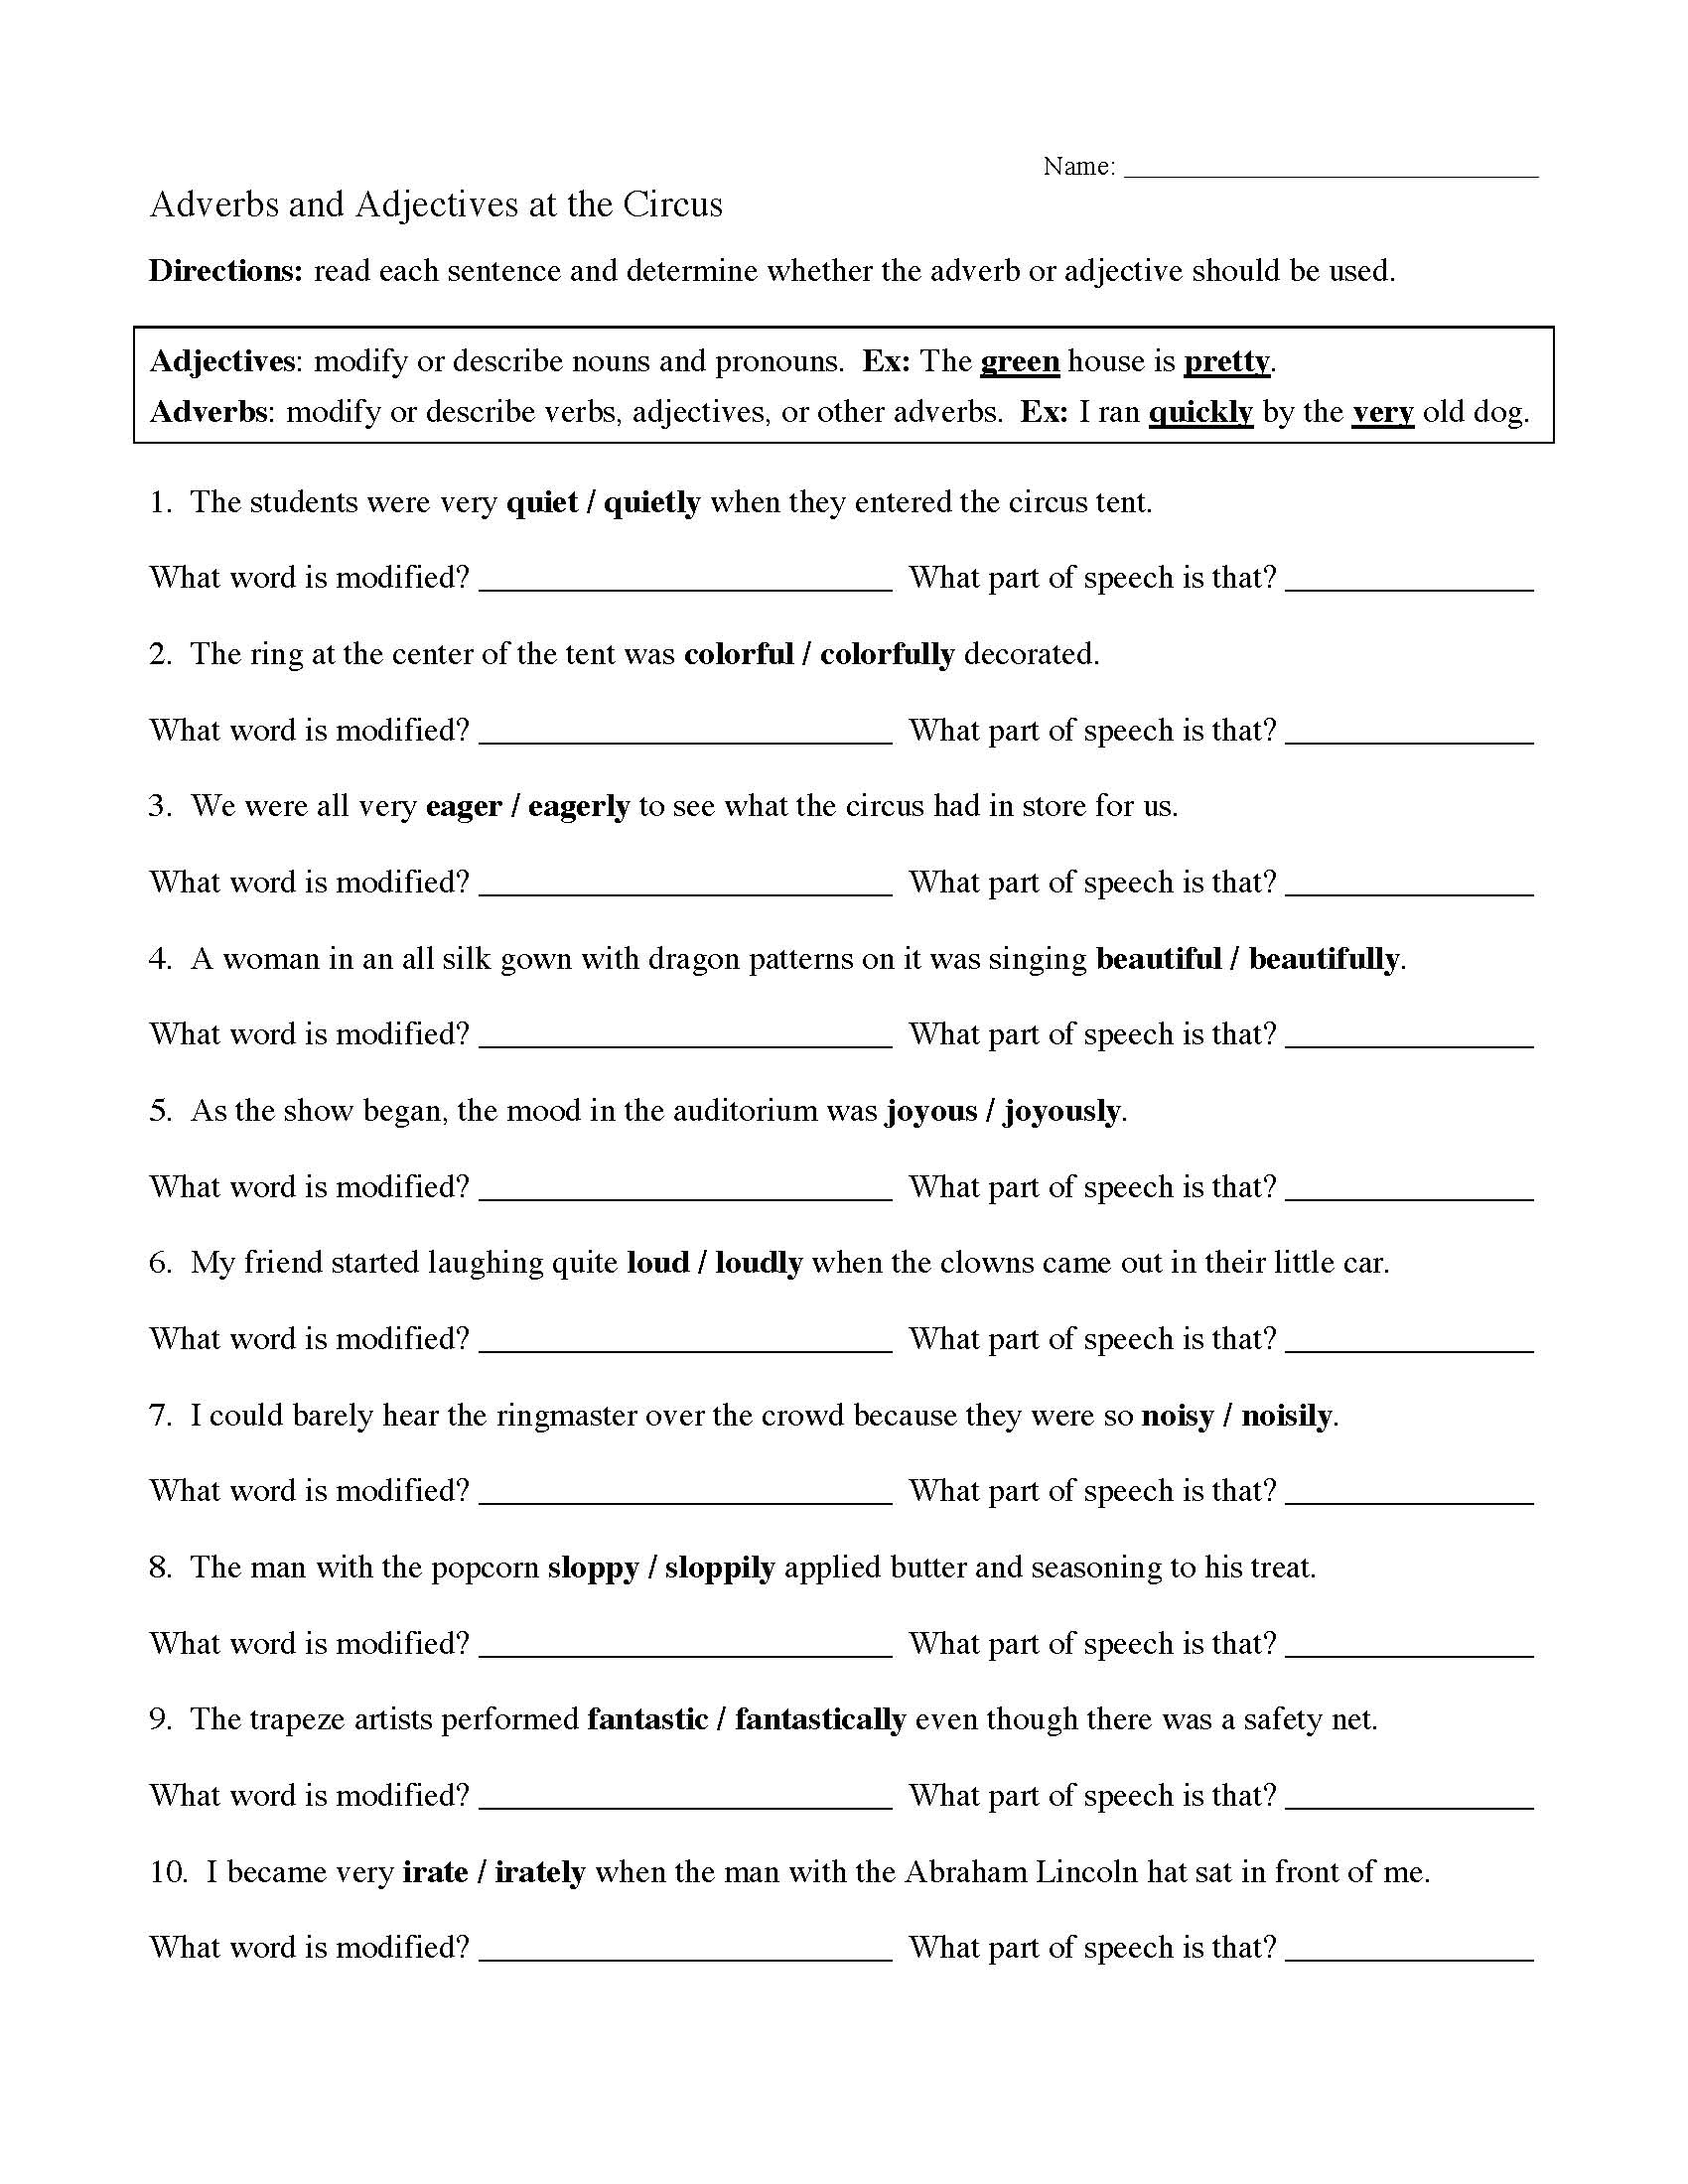 adverbs-and-adjectives-worksheet-2-preview